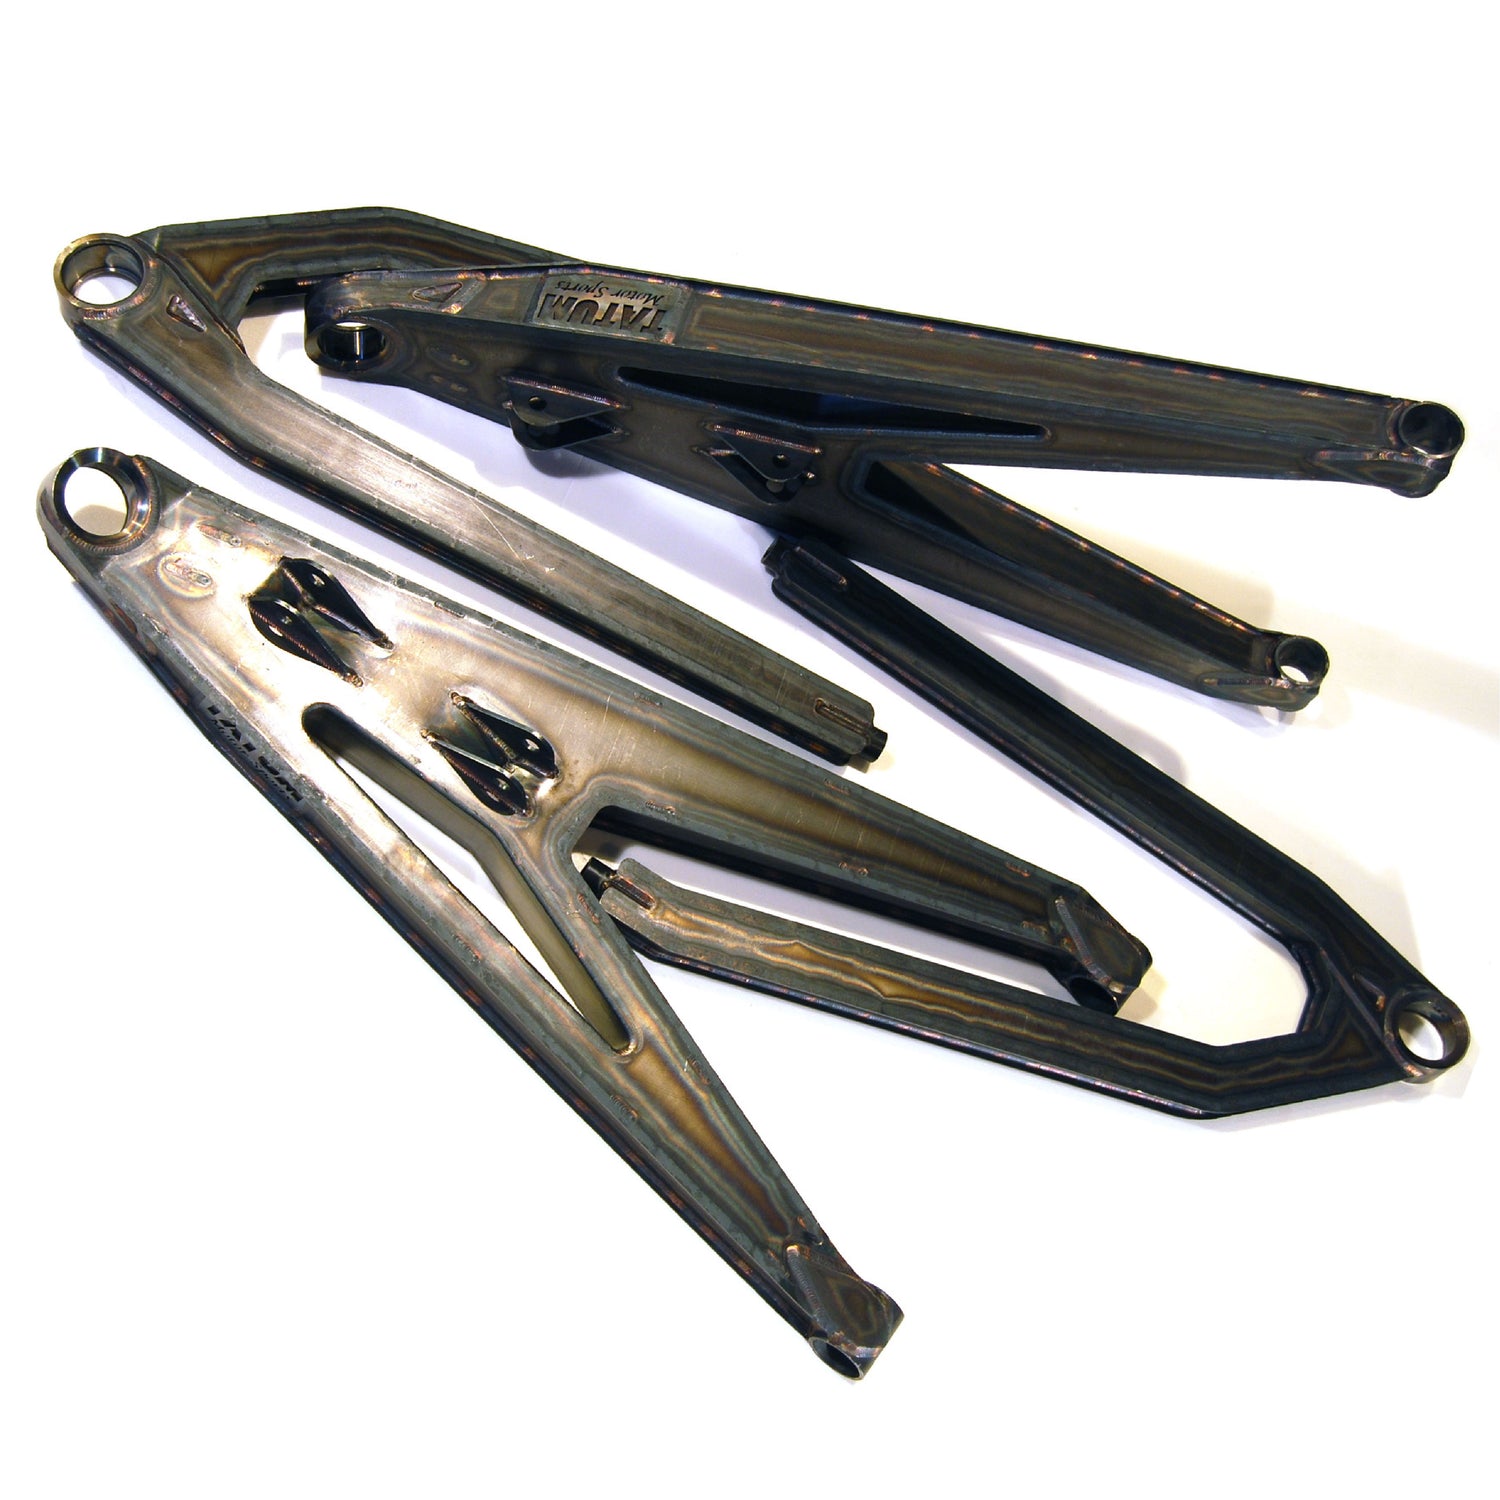 A-Arms & Trailing Arms